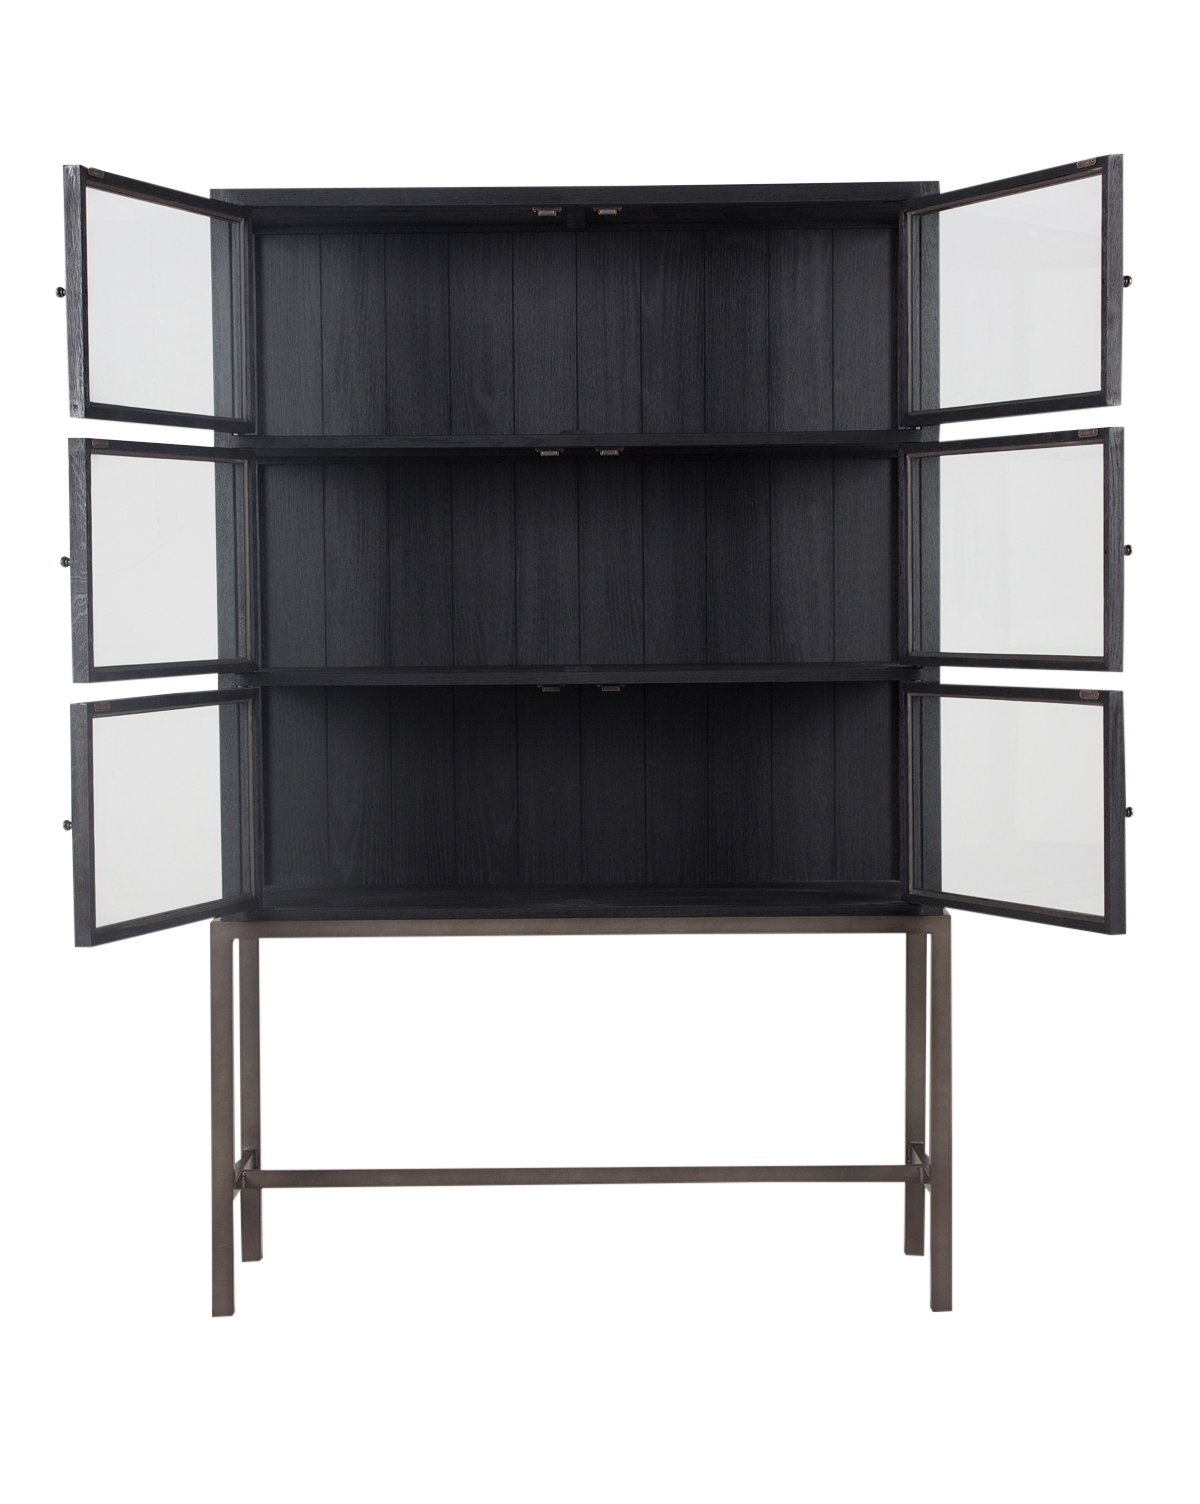 LAWLEY CABINET, DRIFTED BLACK - Image 5